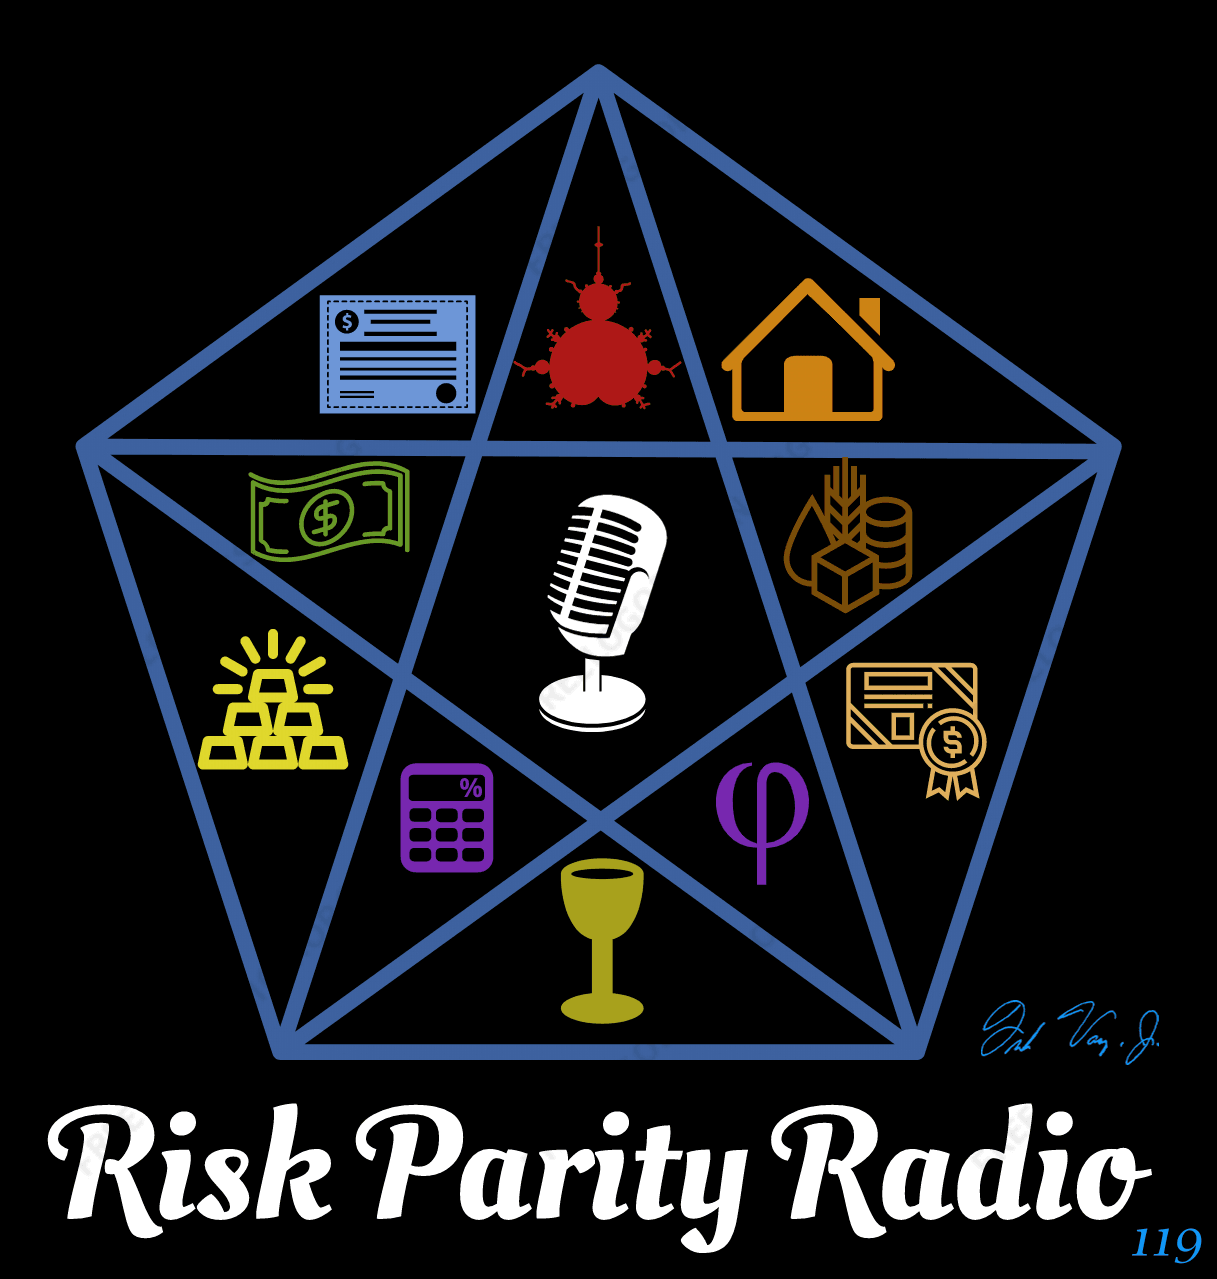 Limited Edition Risk Parity Radio Autographed Print #119